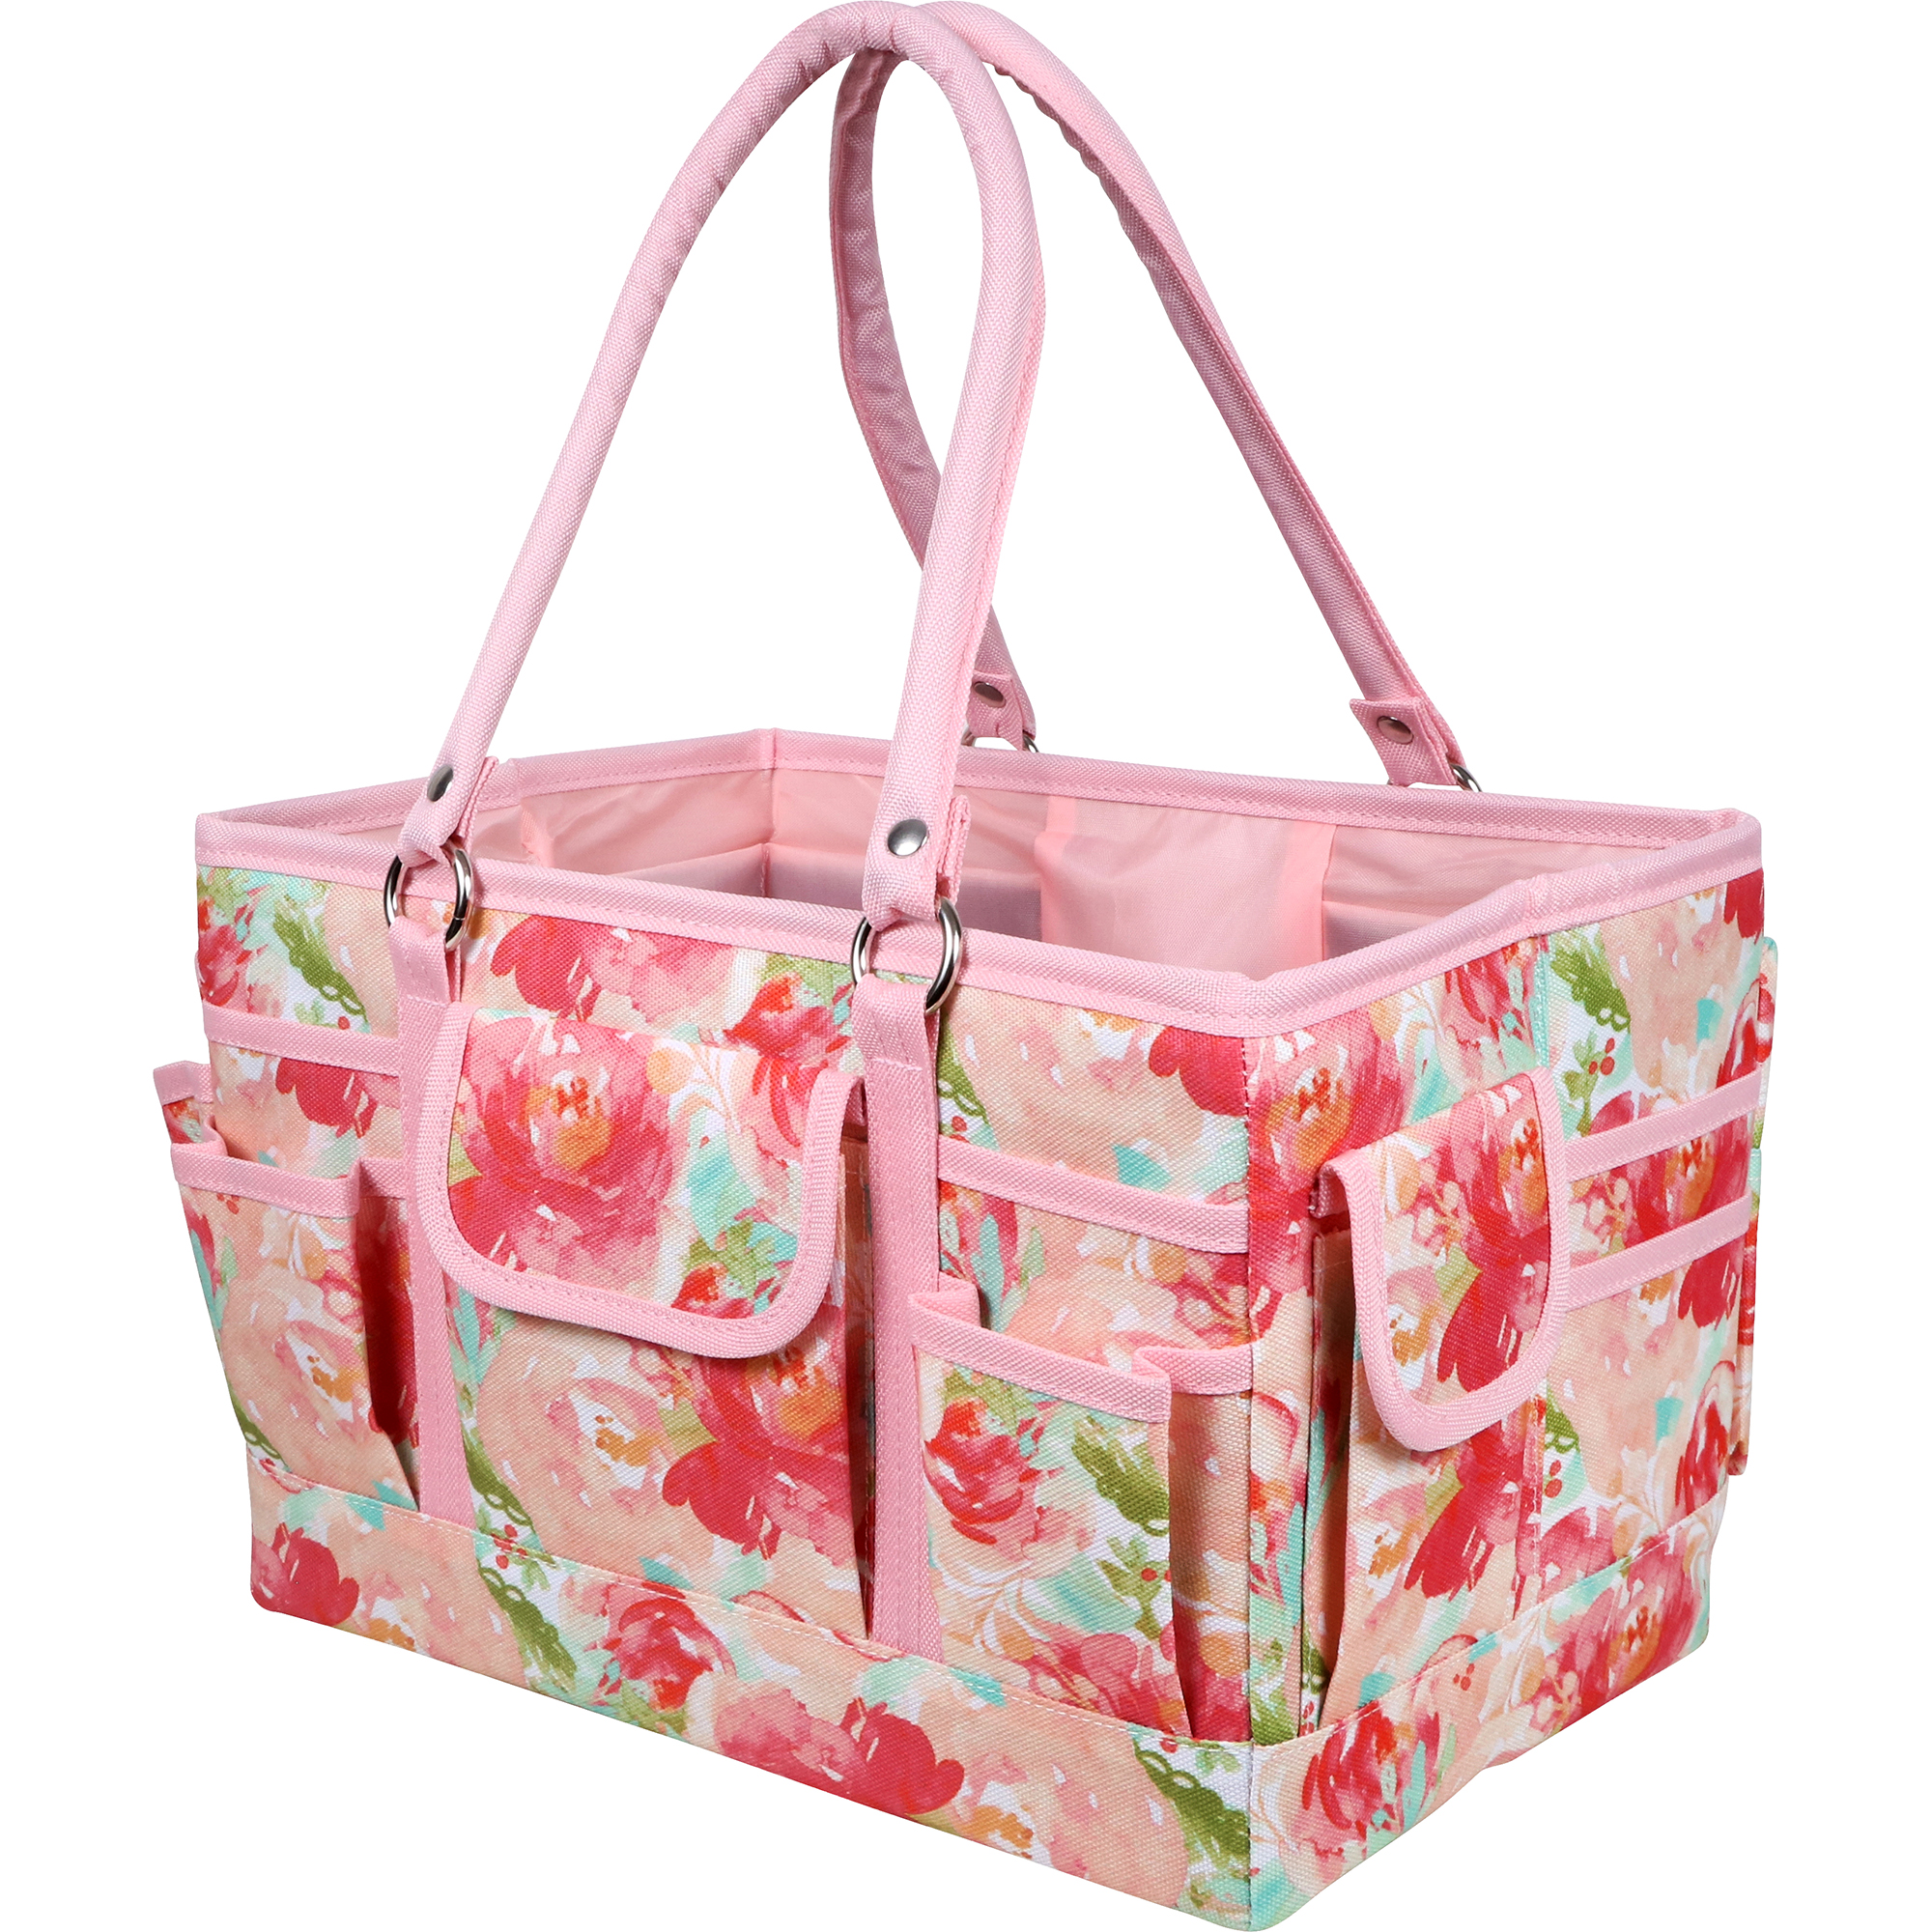 SINGER Sewing Storage Organizer Collapsible Tote Caddy, Craft Storage, Watercolor Floral Print, 1 Count - image 4 of 13